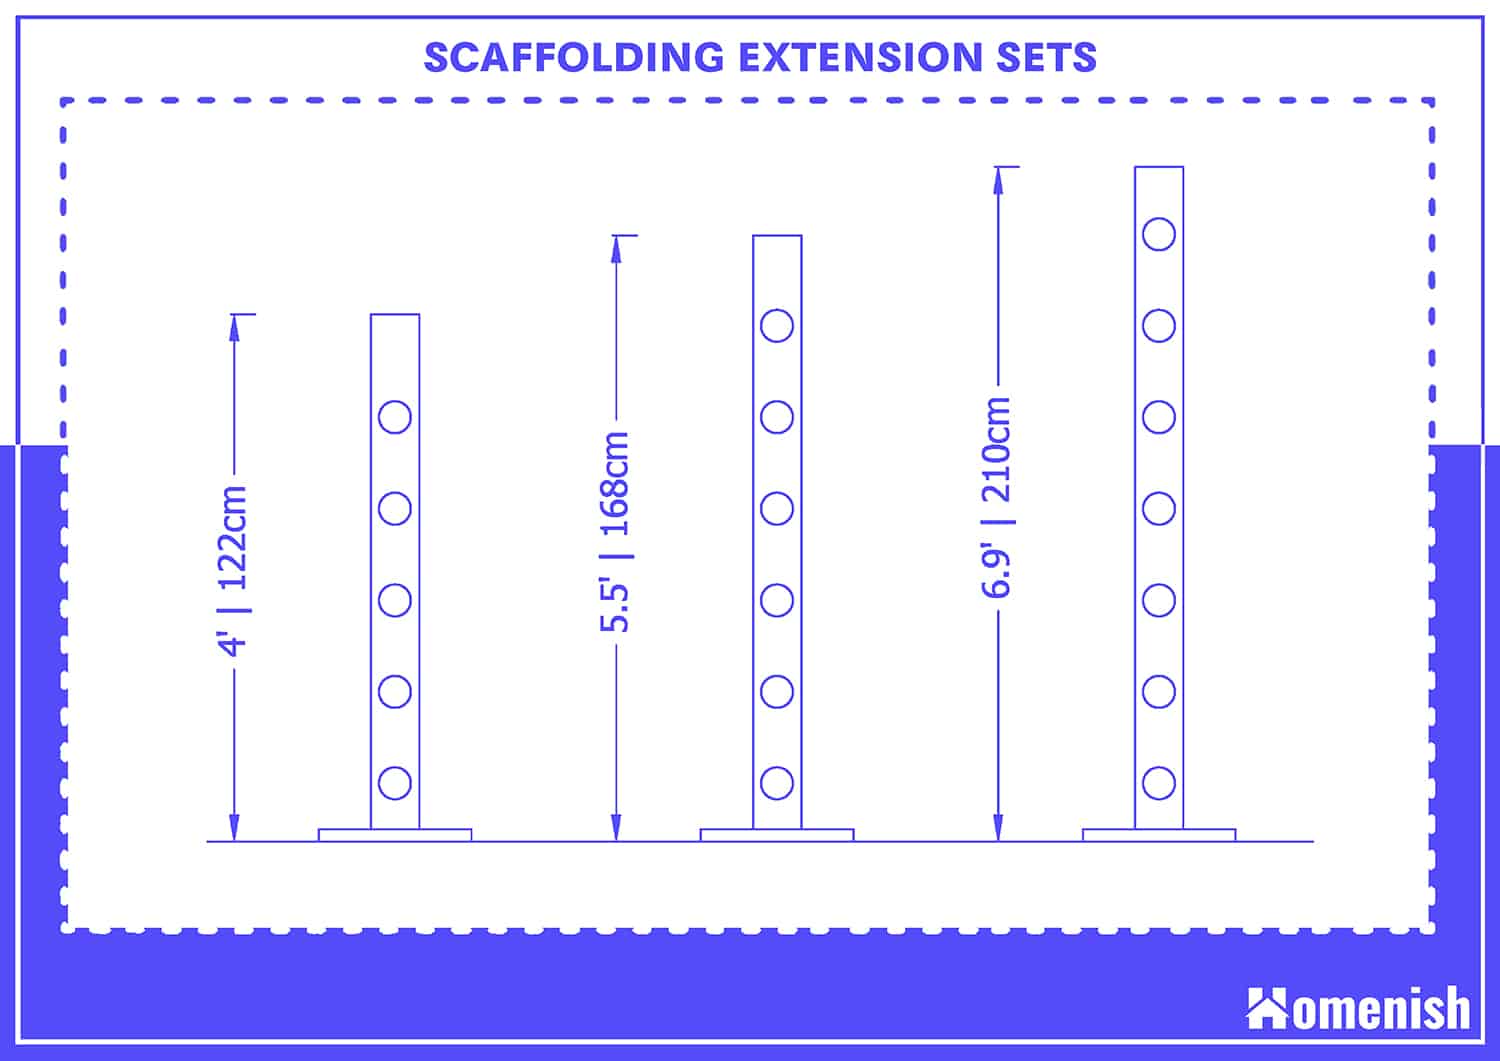 Scaffolding Extension Sets